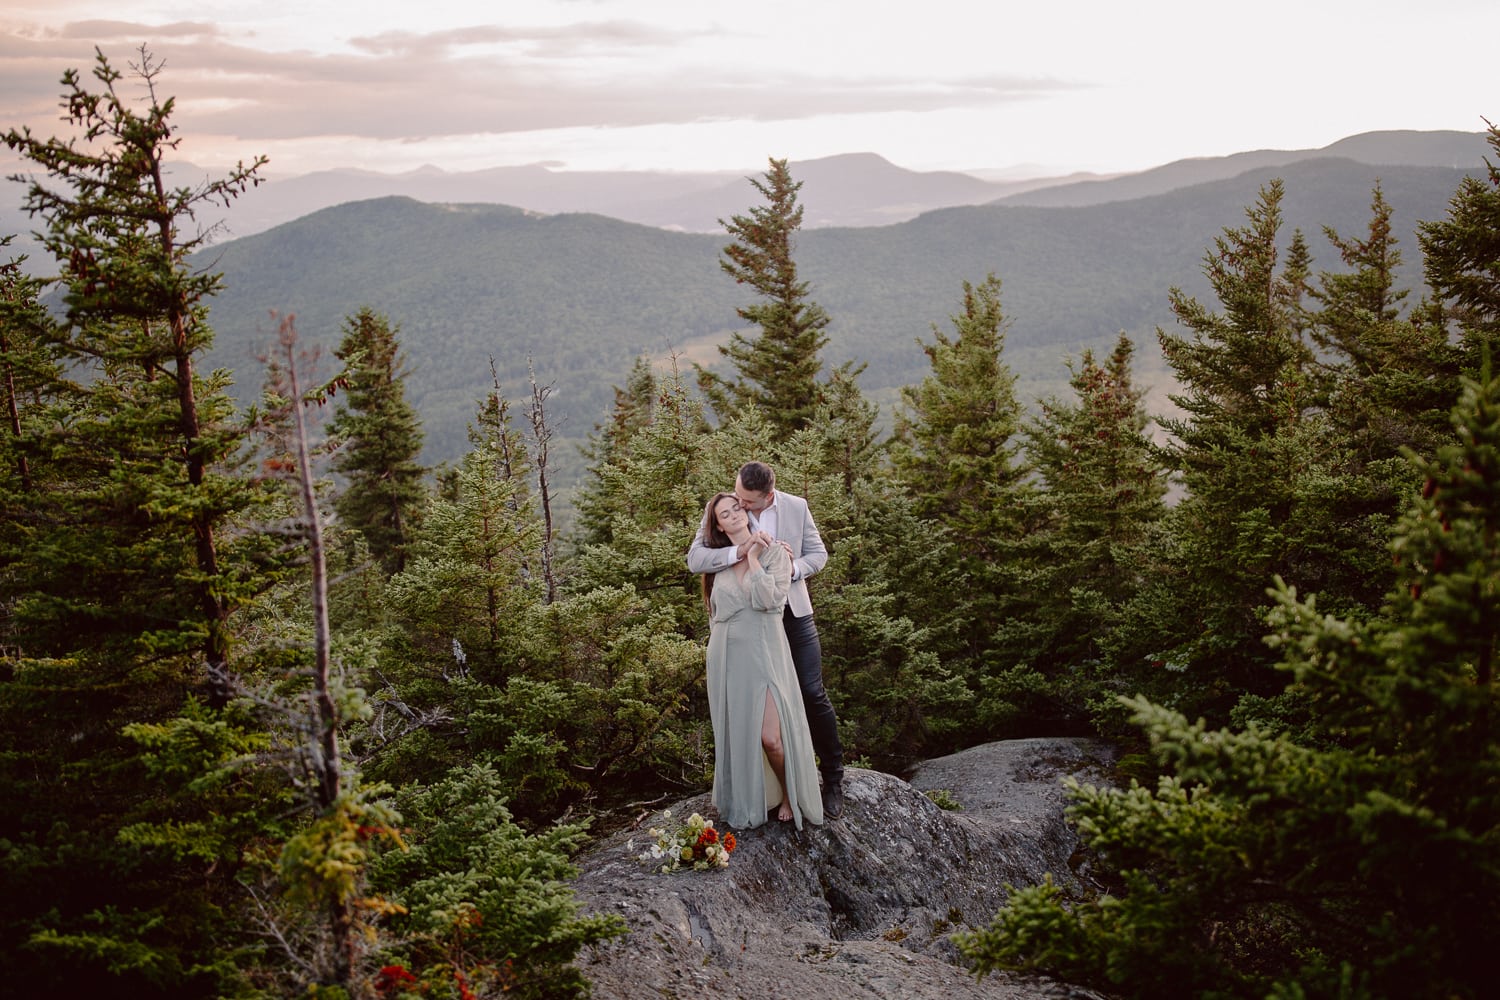 Couple Eloping at Sunrise on Mountain in Acadia National Park